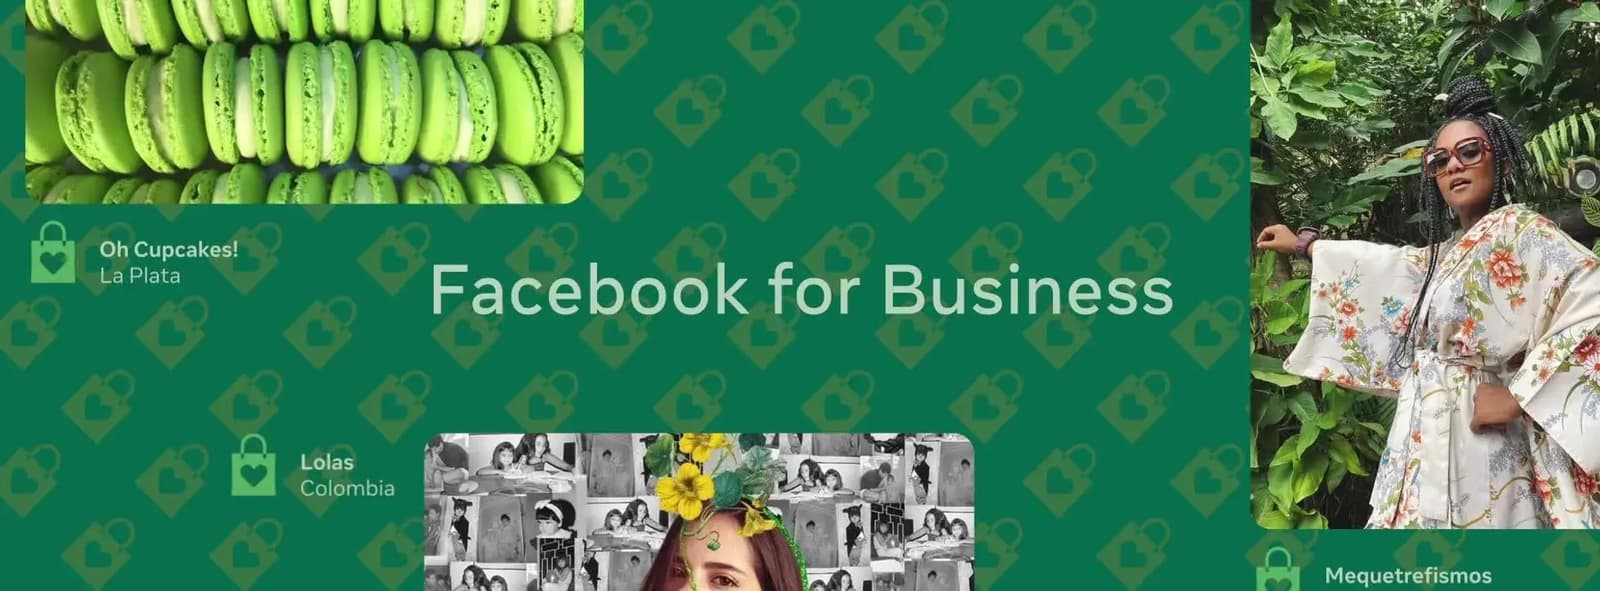 Facebook for Business - Social Strategy & Content Development